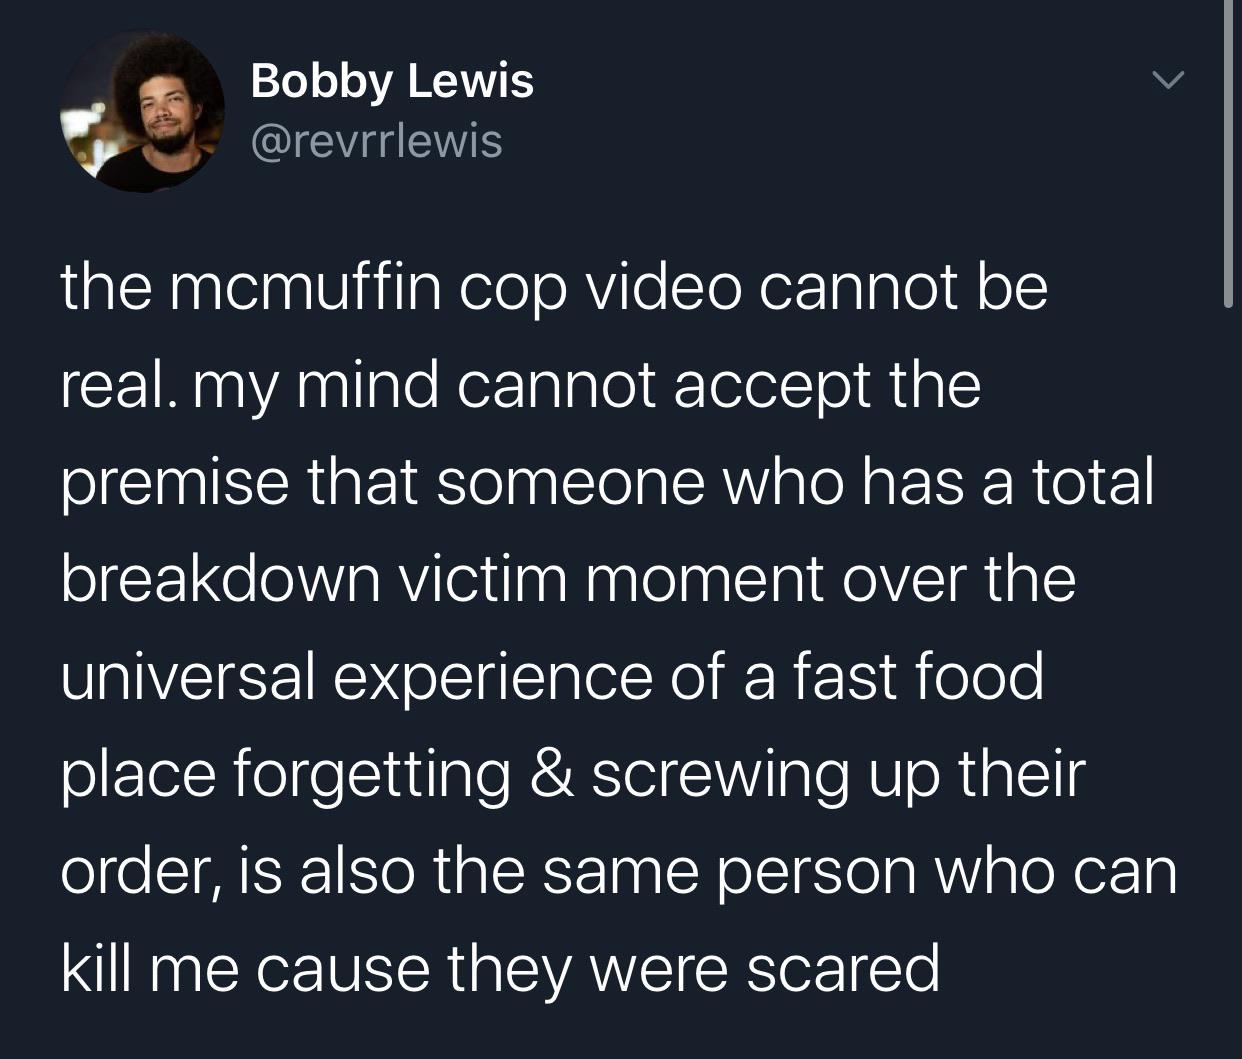 Tweets, Karen, McDonald, Thank, McMuffin Black Twitter Memes Tweets, Karen, McDonald, Thank, McMuffin text: Bobby Lewis @revrrlewis the mcmuffin cop video cannot be real. my mind cannot accept the premise that someone who has a total breakdown victim moment over the universal experience of a fast food place forgetting & screwing up their order, is also the same person who can kill me cause they were scared 